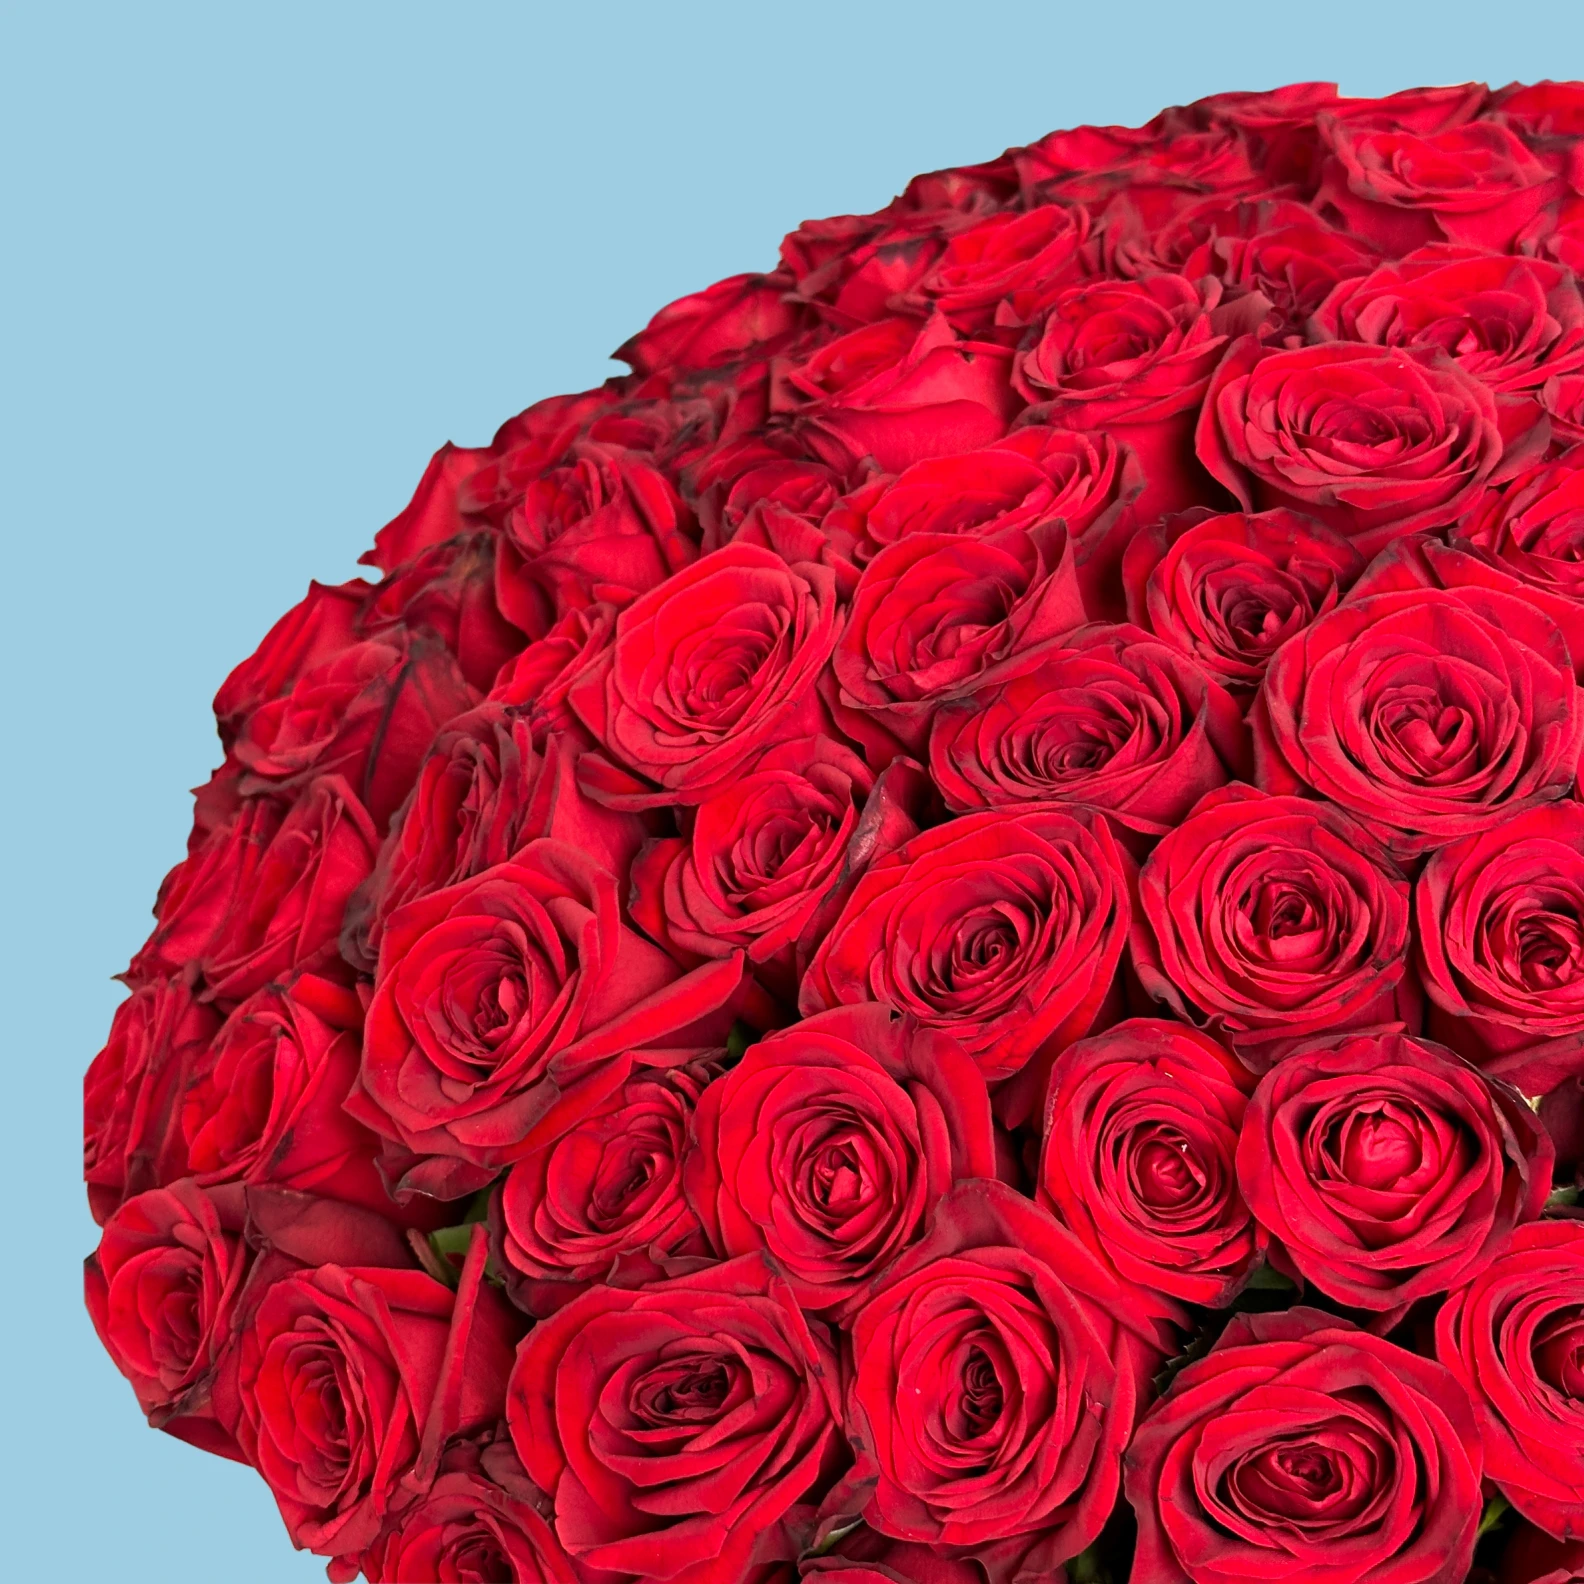 150 Red Roses - image №3